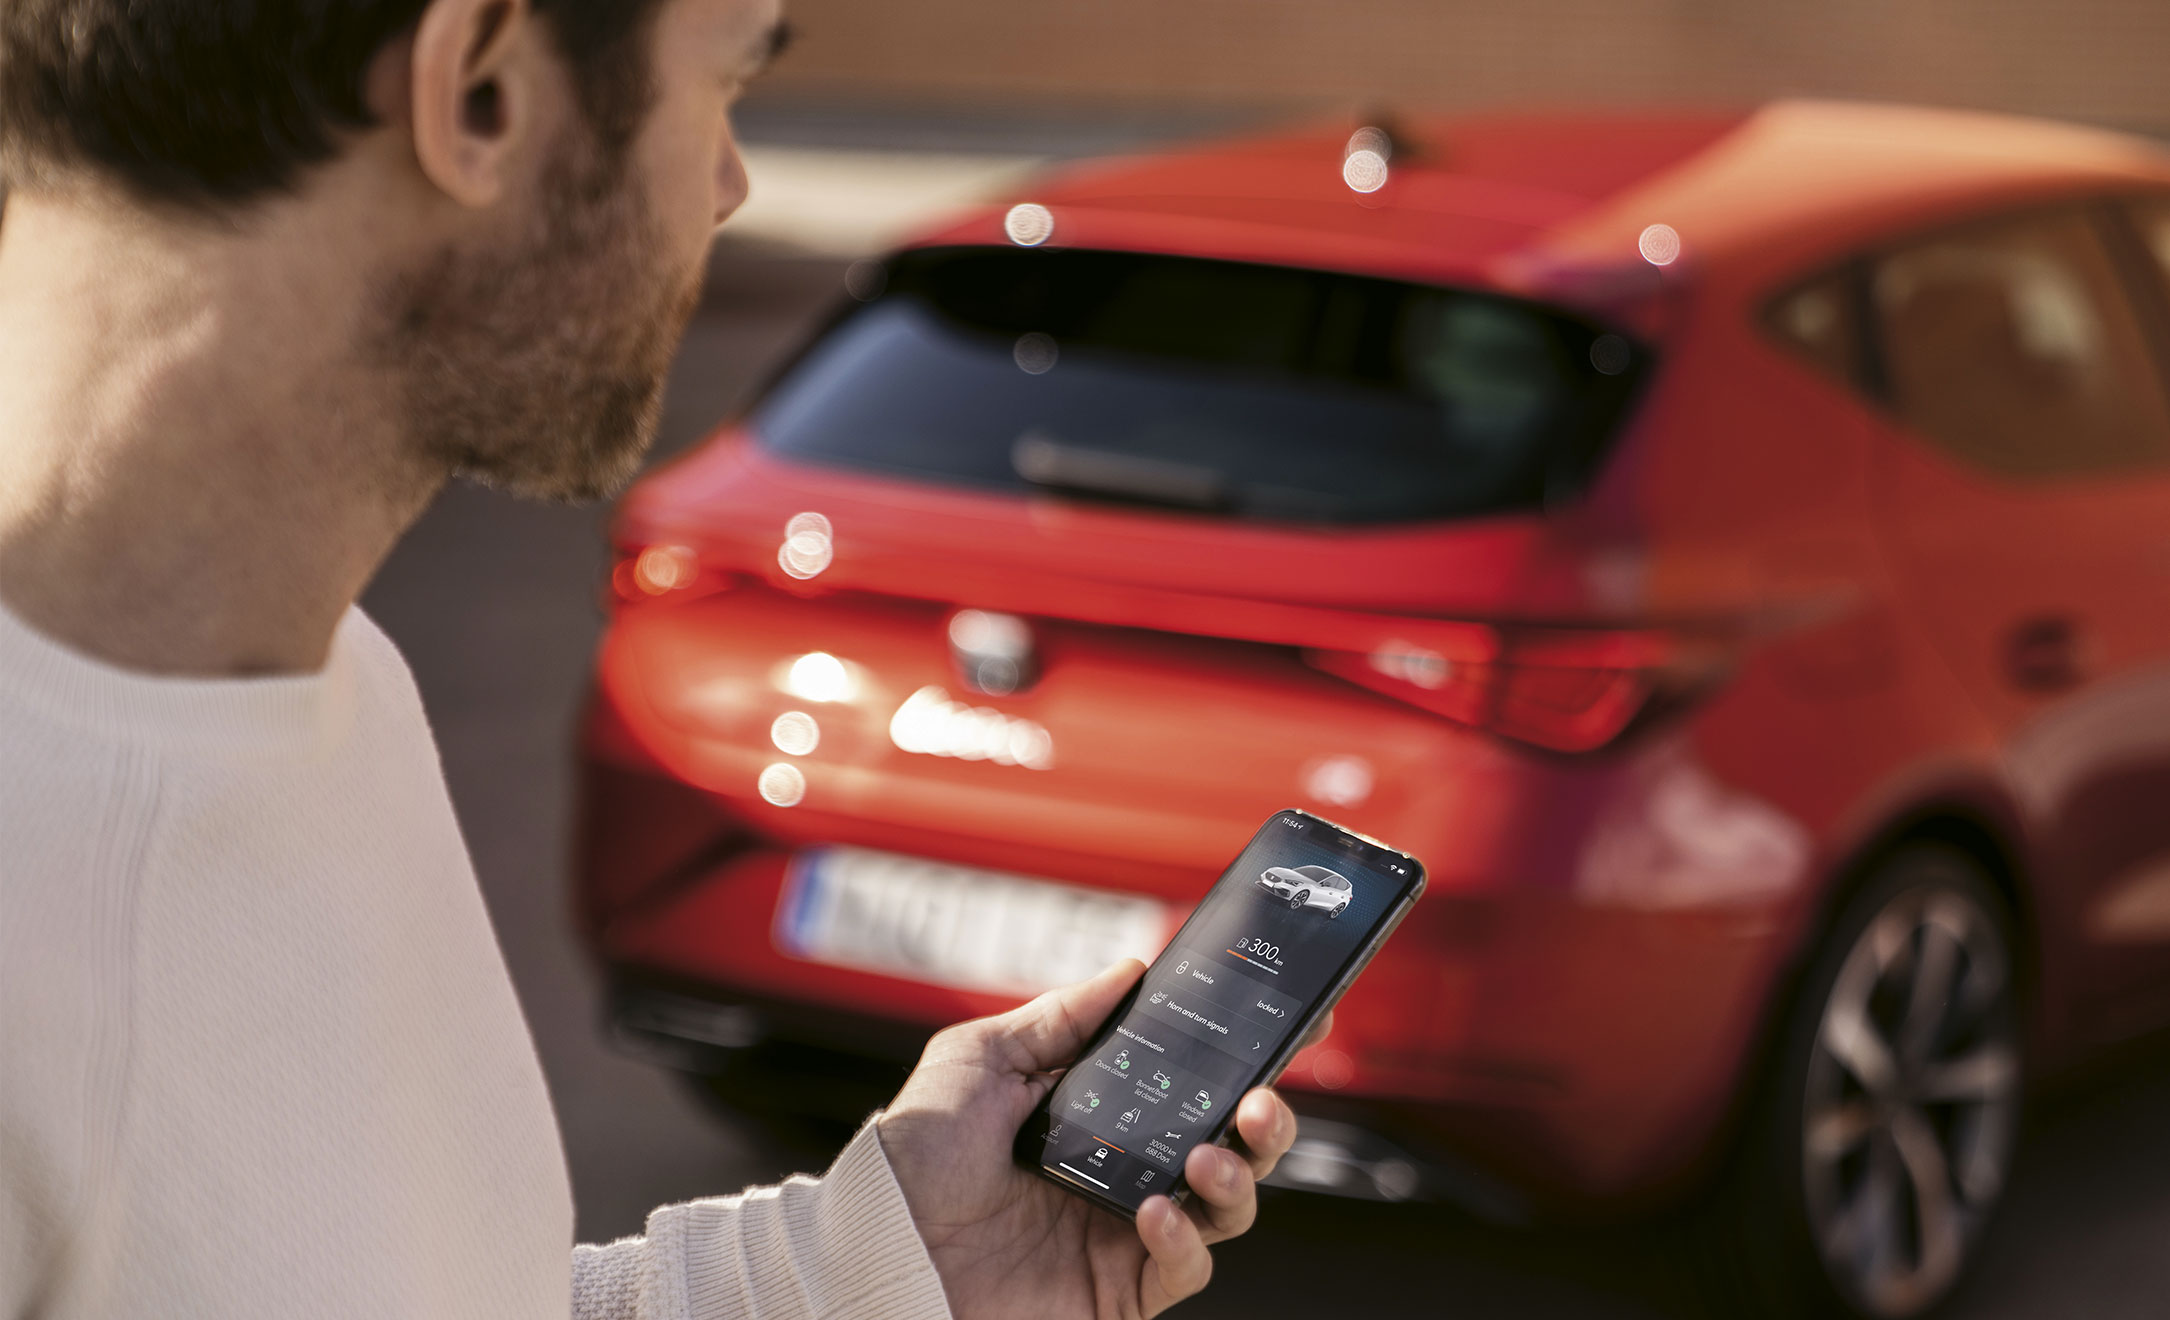 seat leon connect features remote locking and unlocking